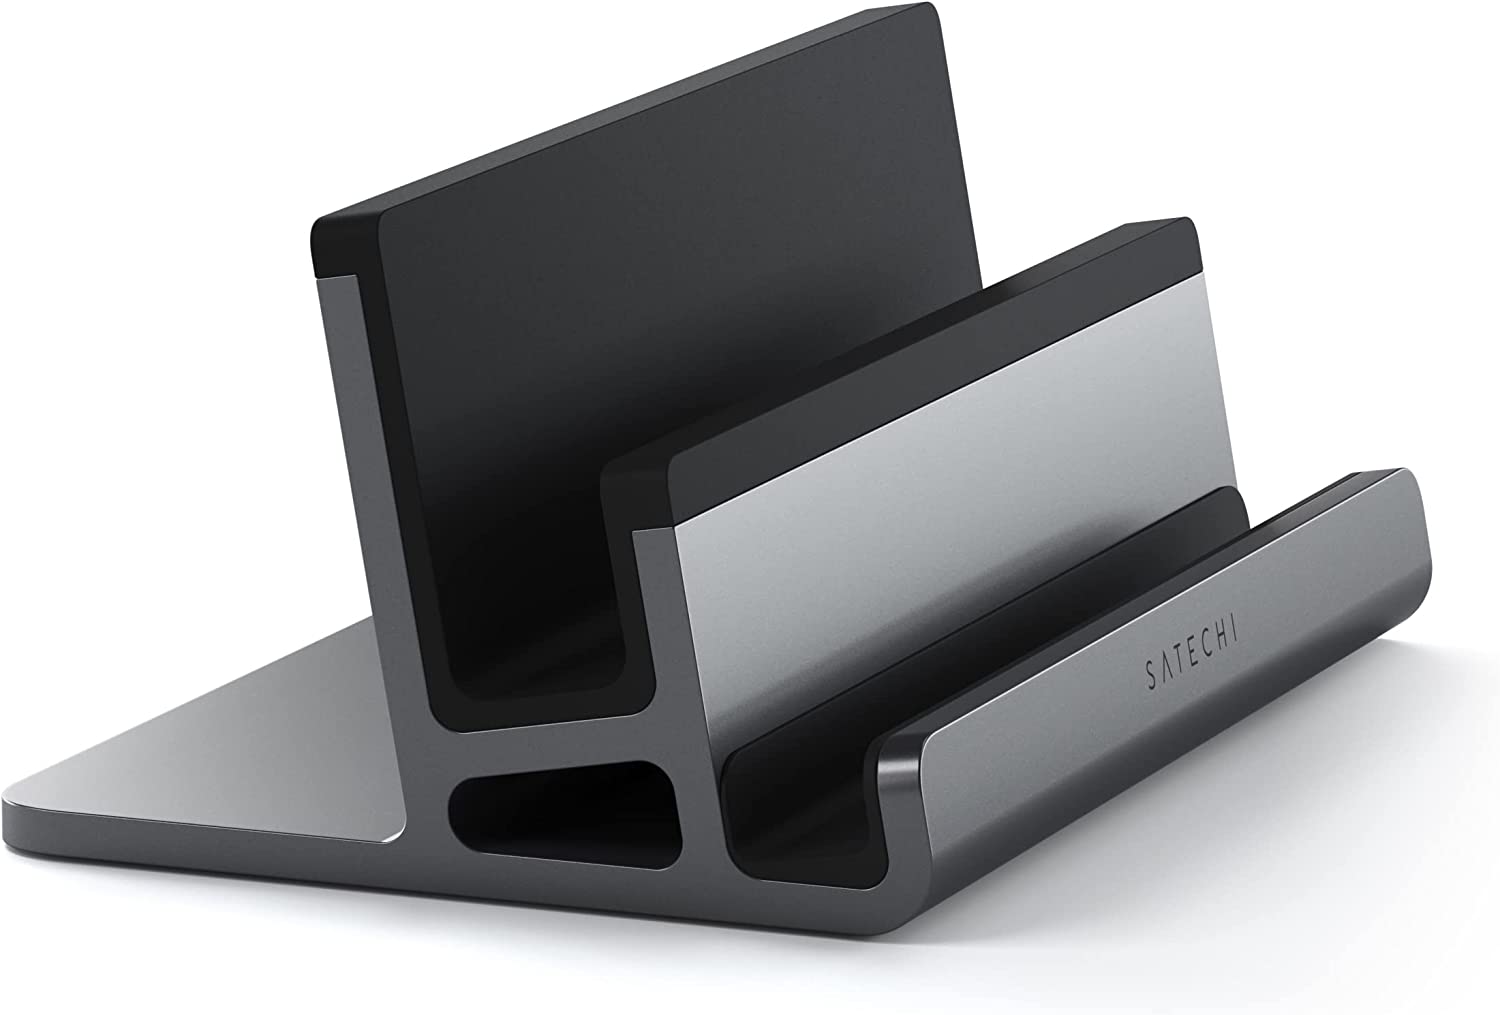 SATECHI Tablet Computer Docks & Stands 8.79961E+11